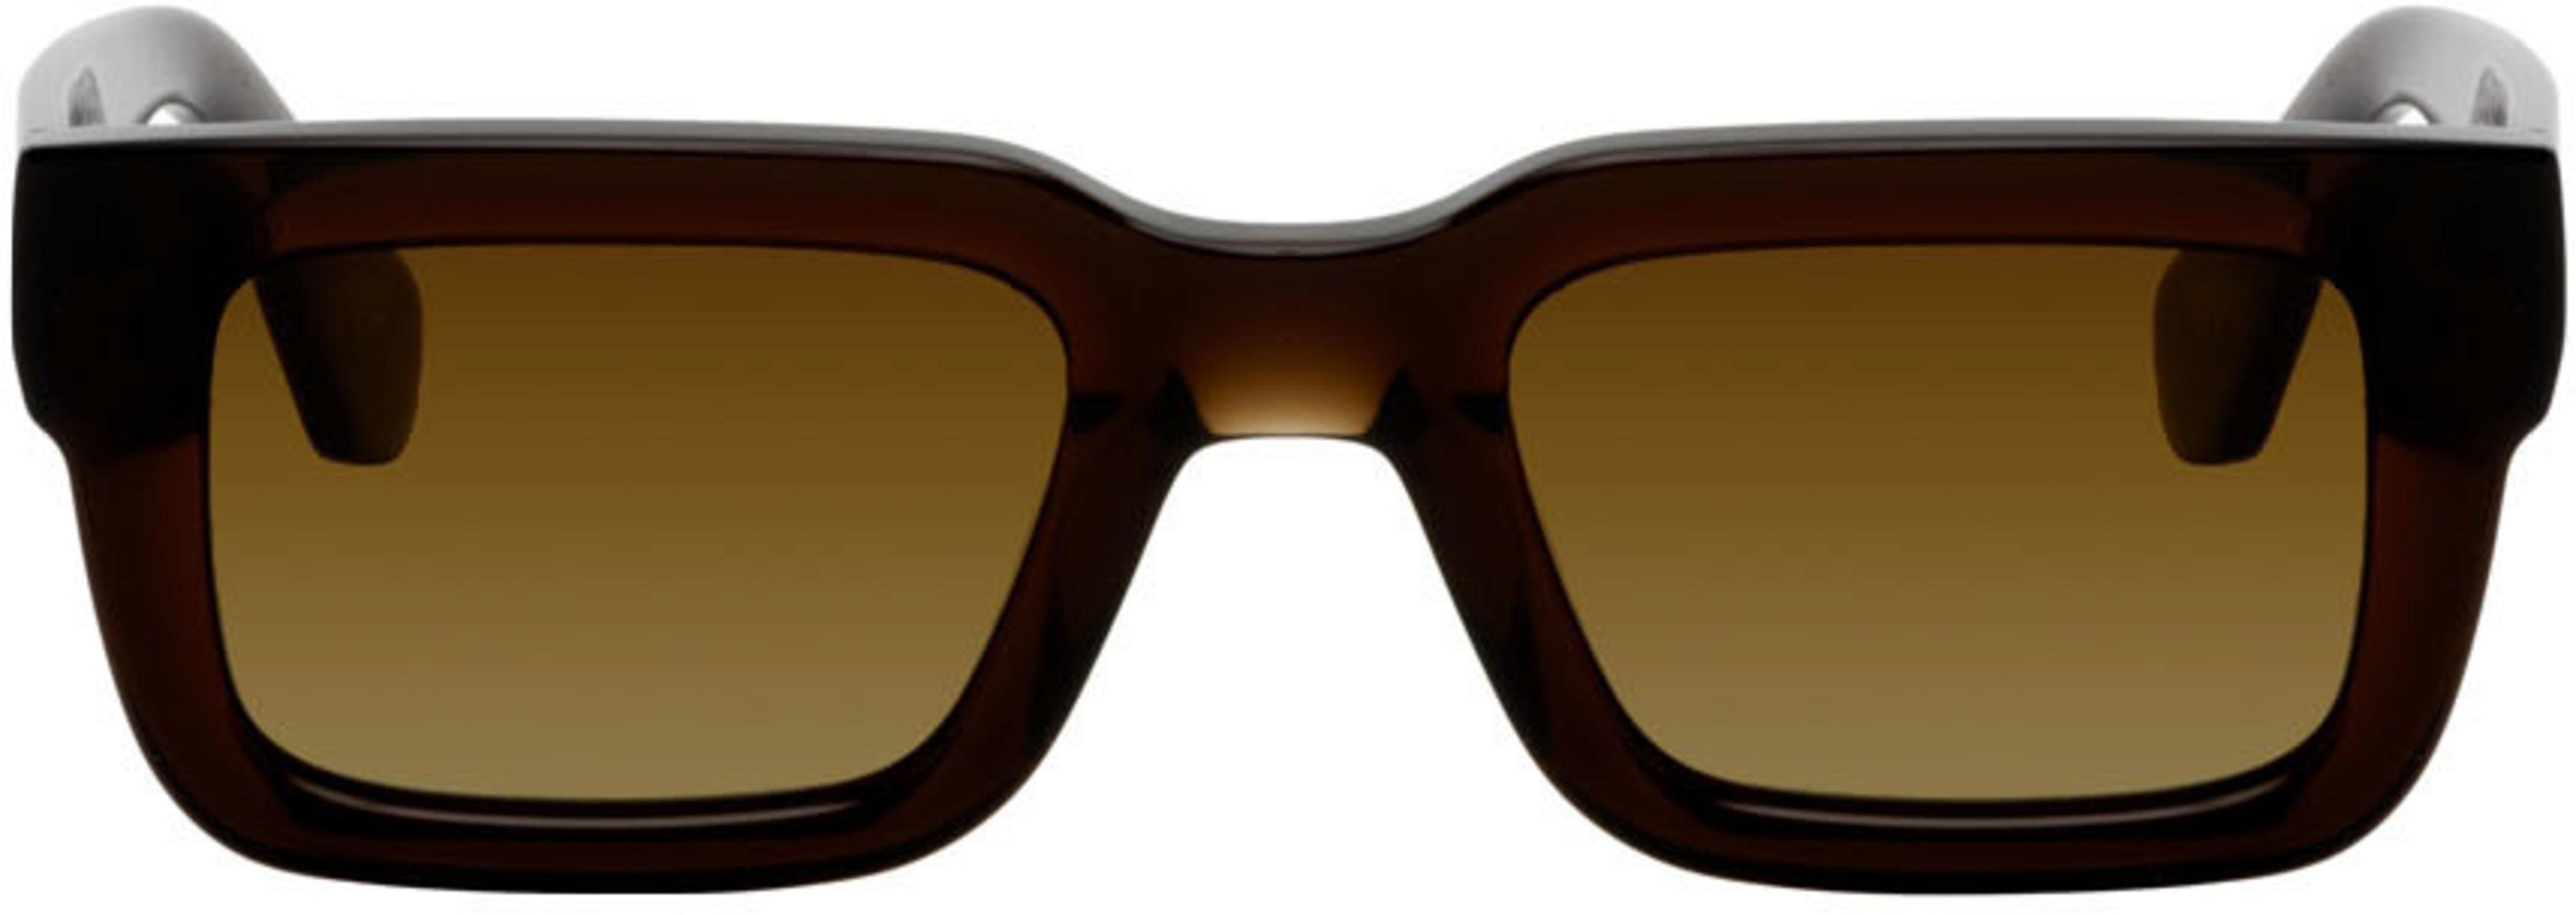 Brown 05 Sunglasses by CHIMI